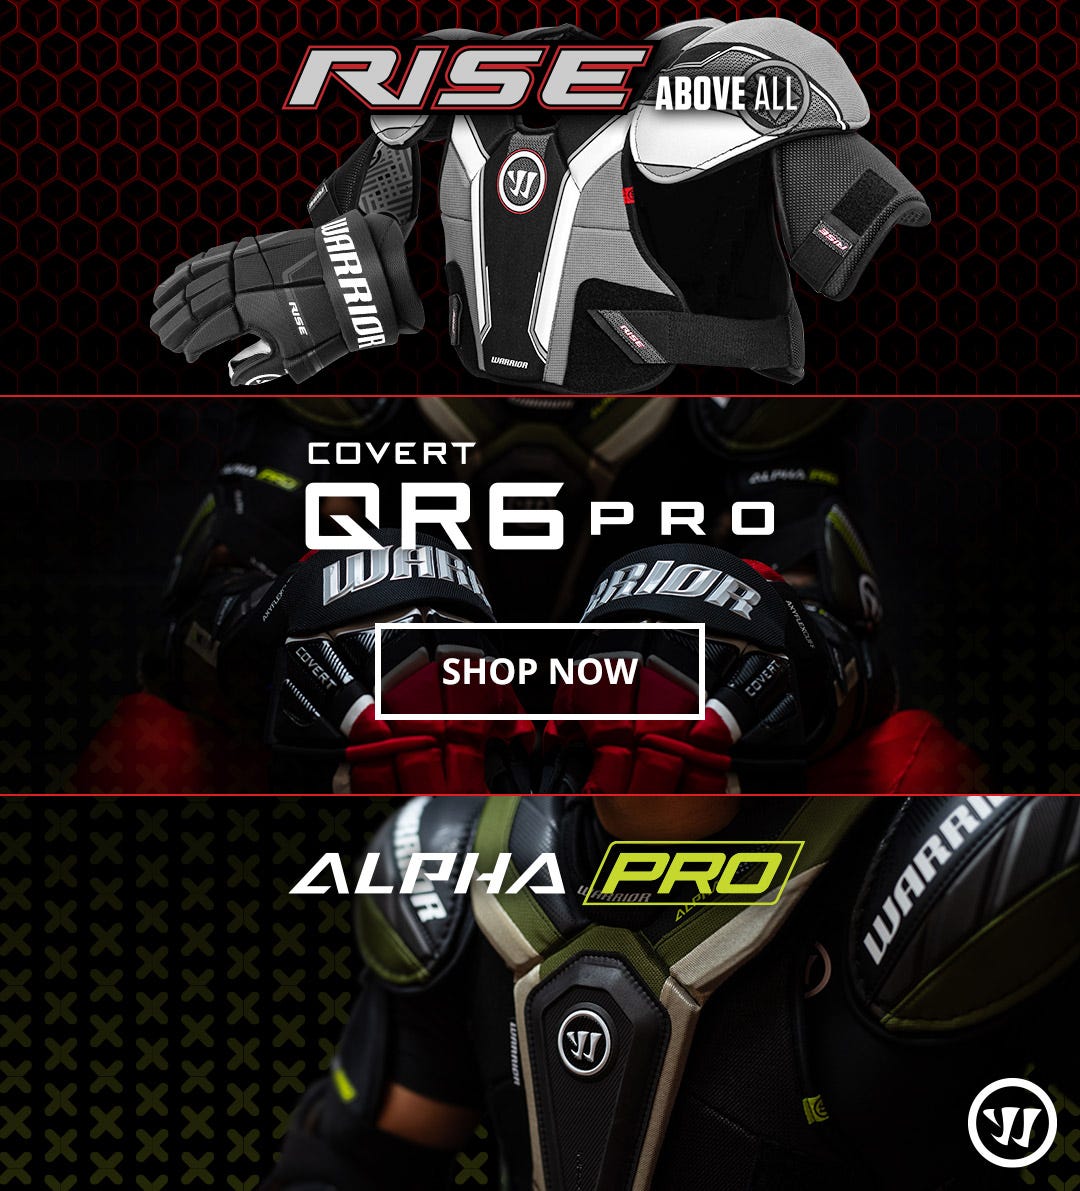 New Warrior Gear: Covert QR6 Gloves, Alpha Pro & LT Protective, and Rise Protective